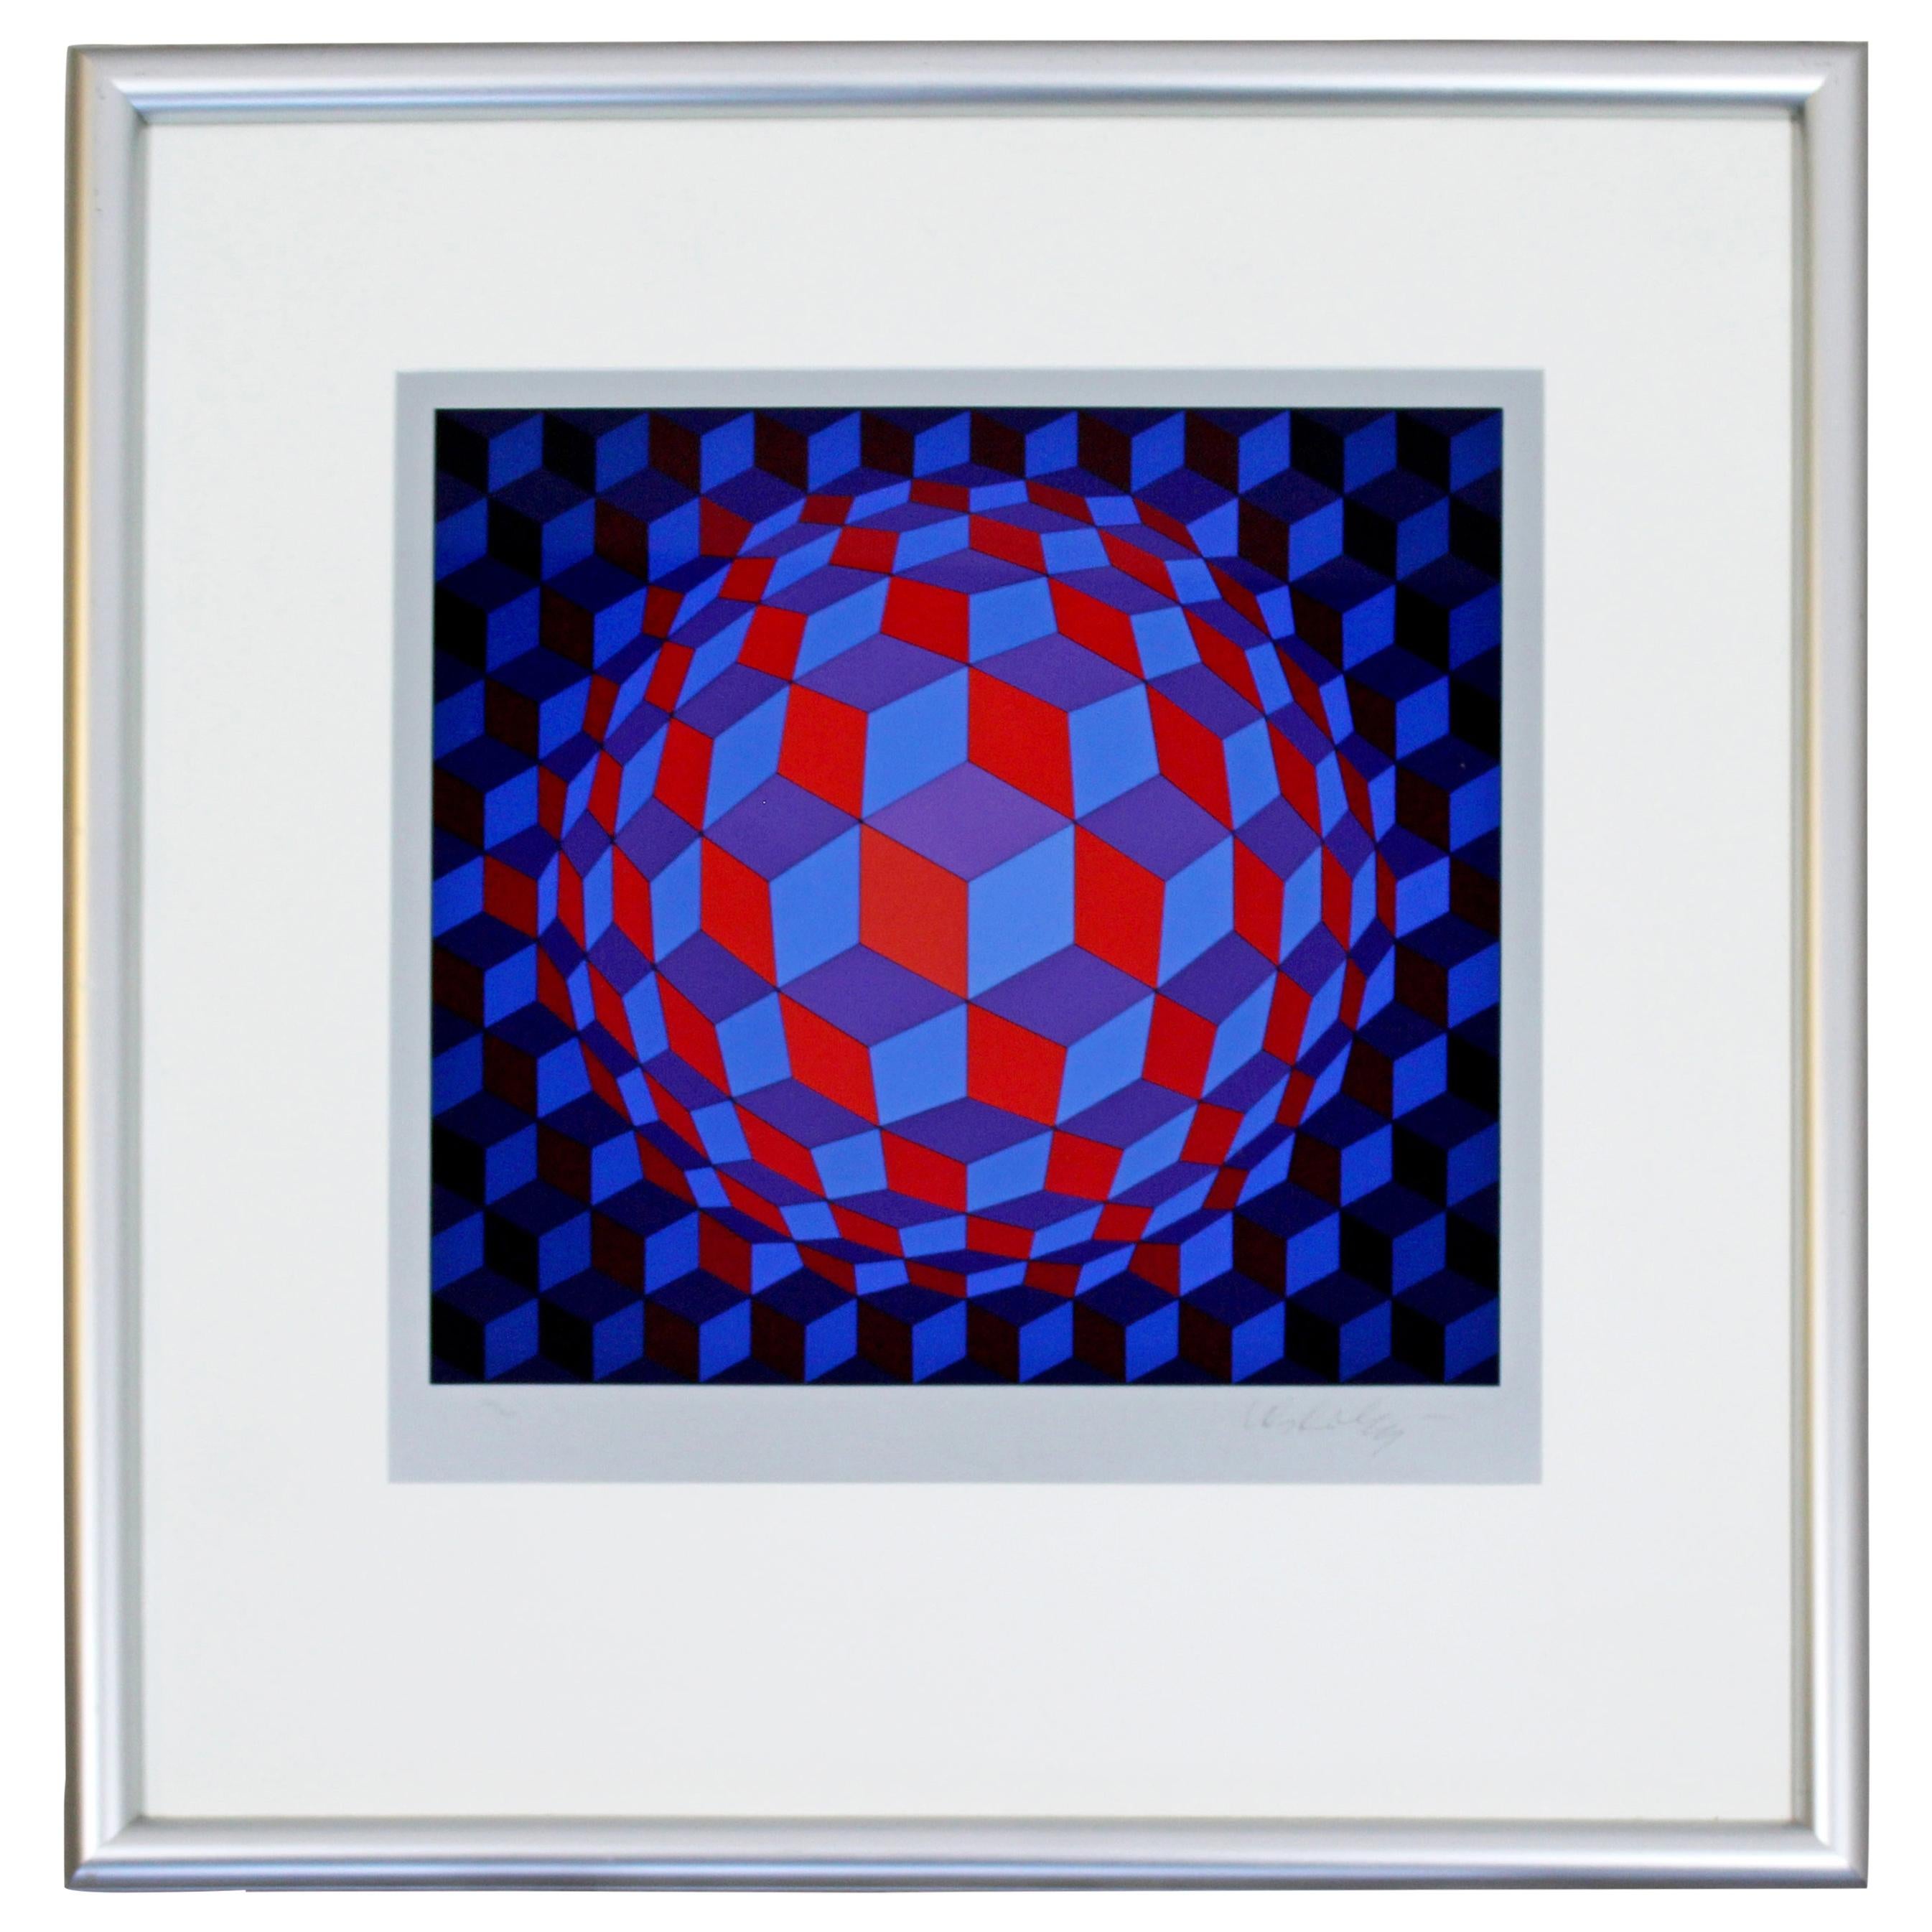 Mid-Century Modern Framed Op Art Serigraph Signed by Vasarely Cheyt Rond, 1970s